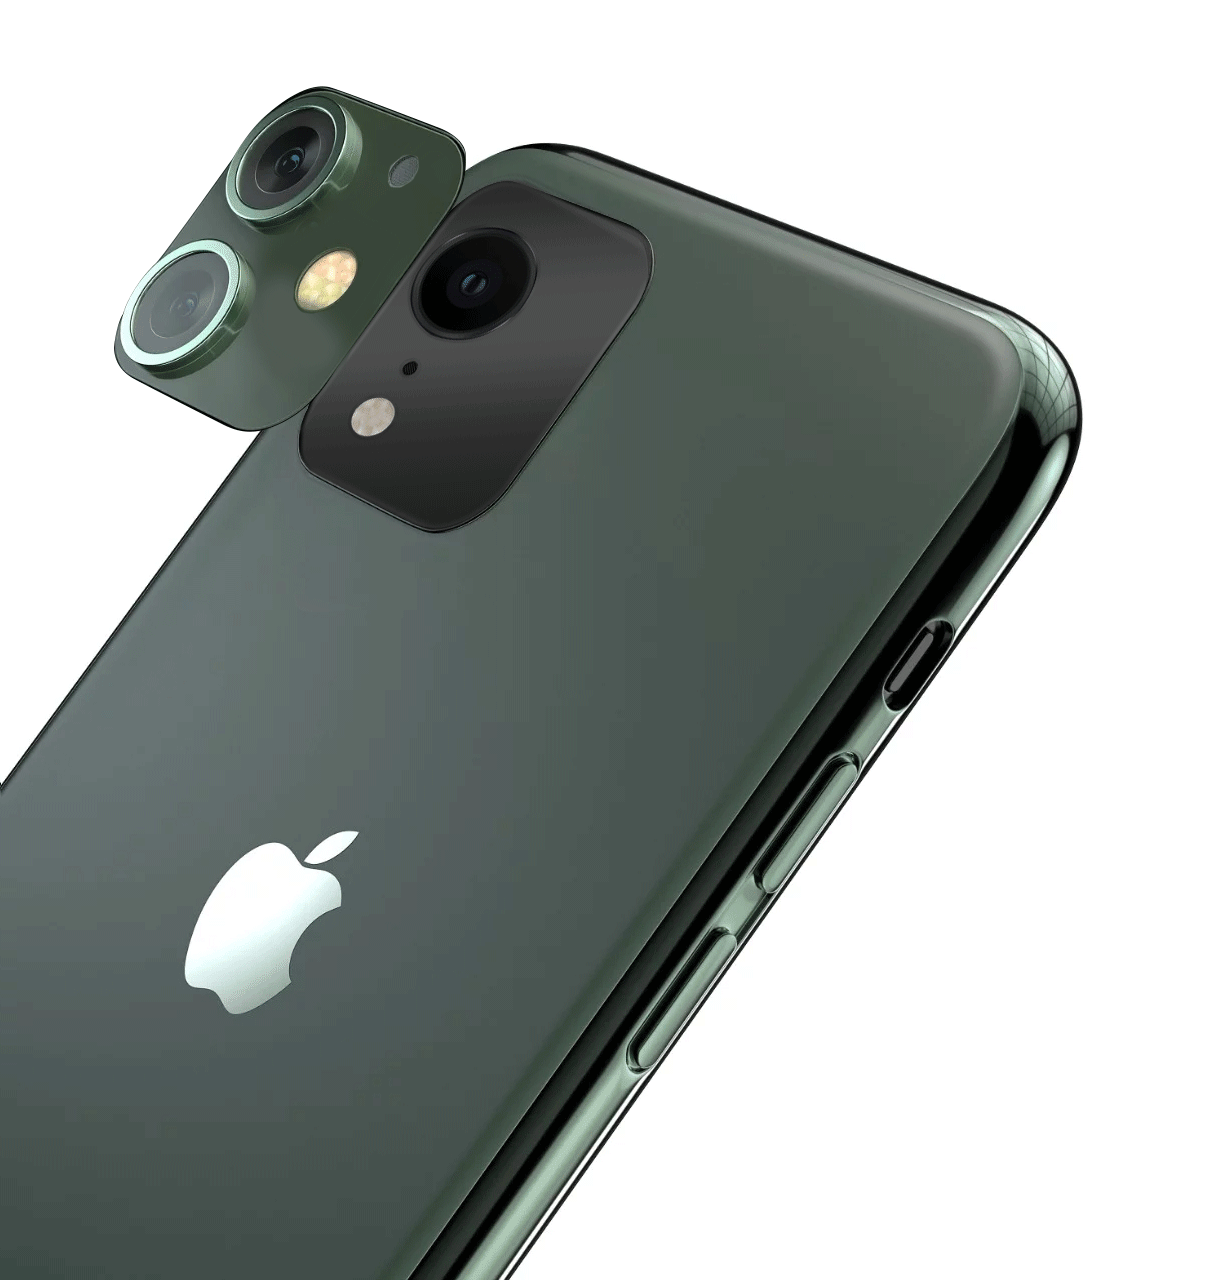 vaku for apple iphone xr to iphone 11 conversion kit